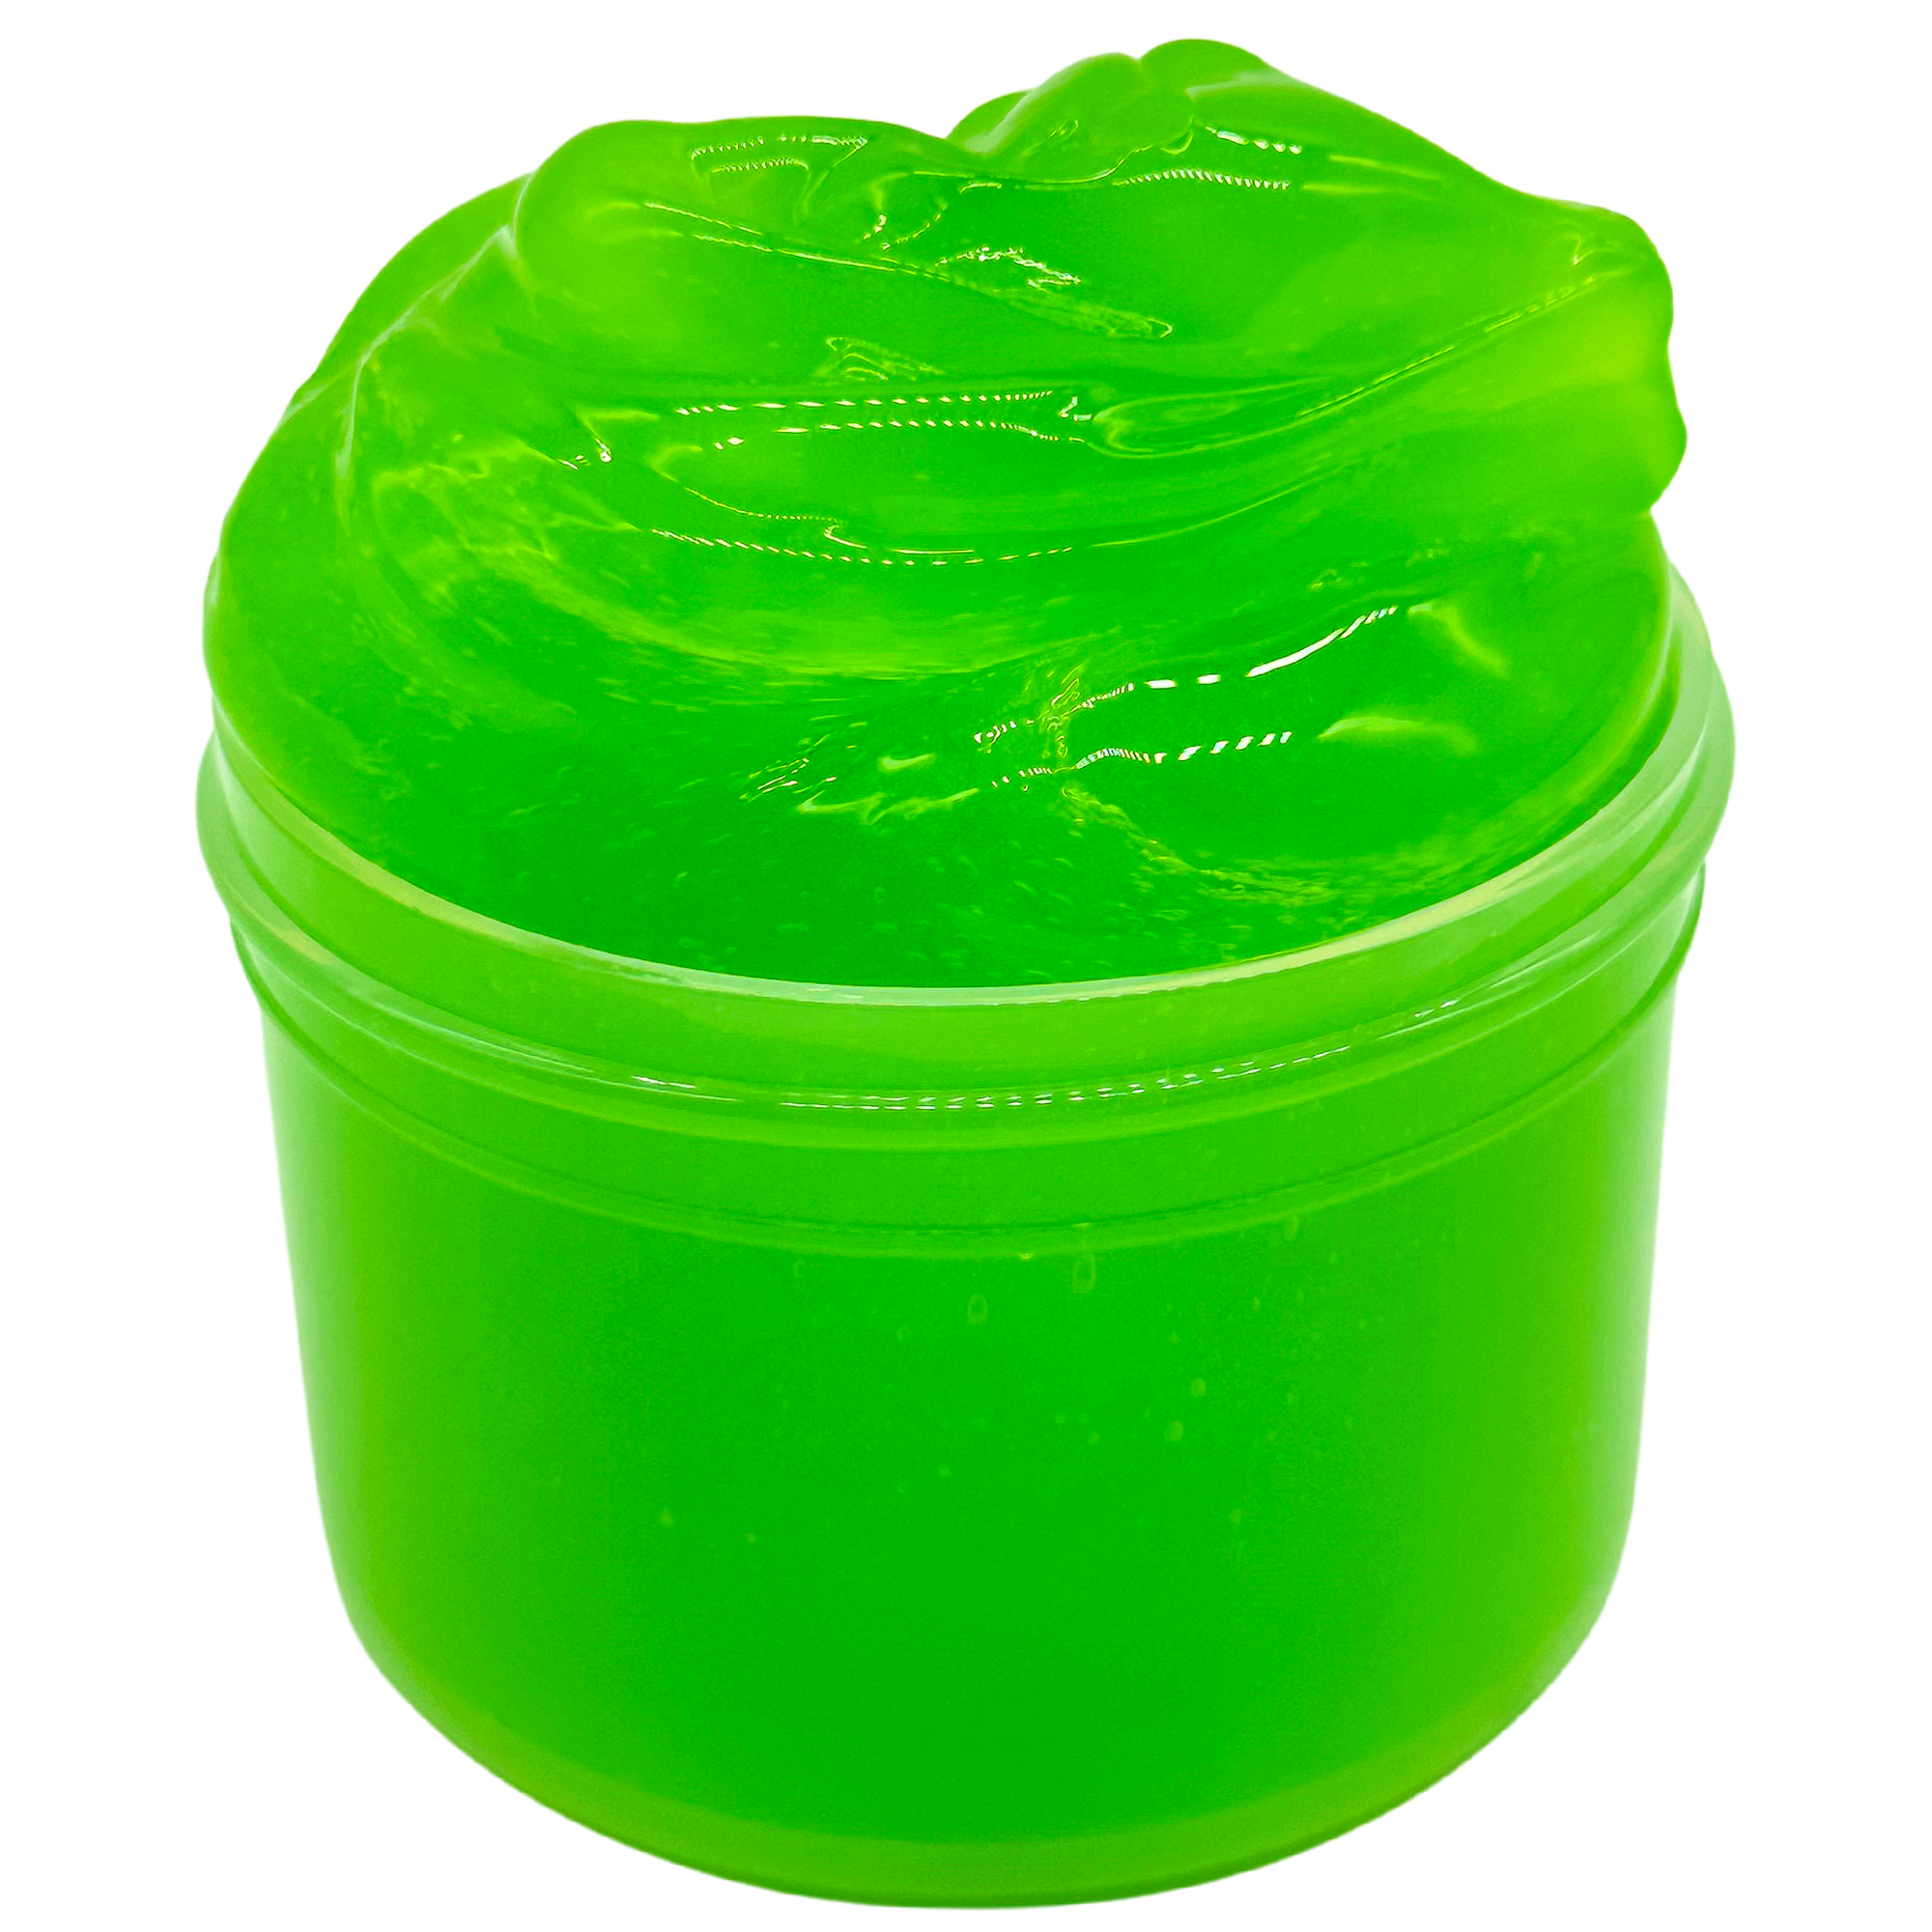 Empty Slime Storage Containers with Lids, Clear Plastic Jars with Labels (6  oz, 30 Pack) 